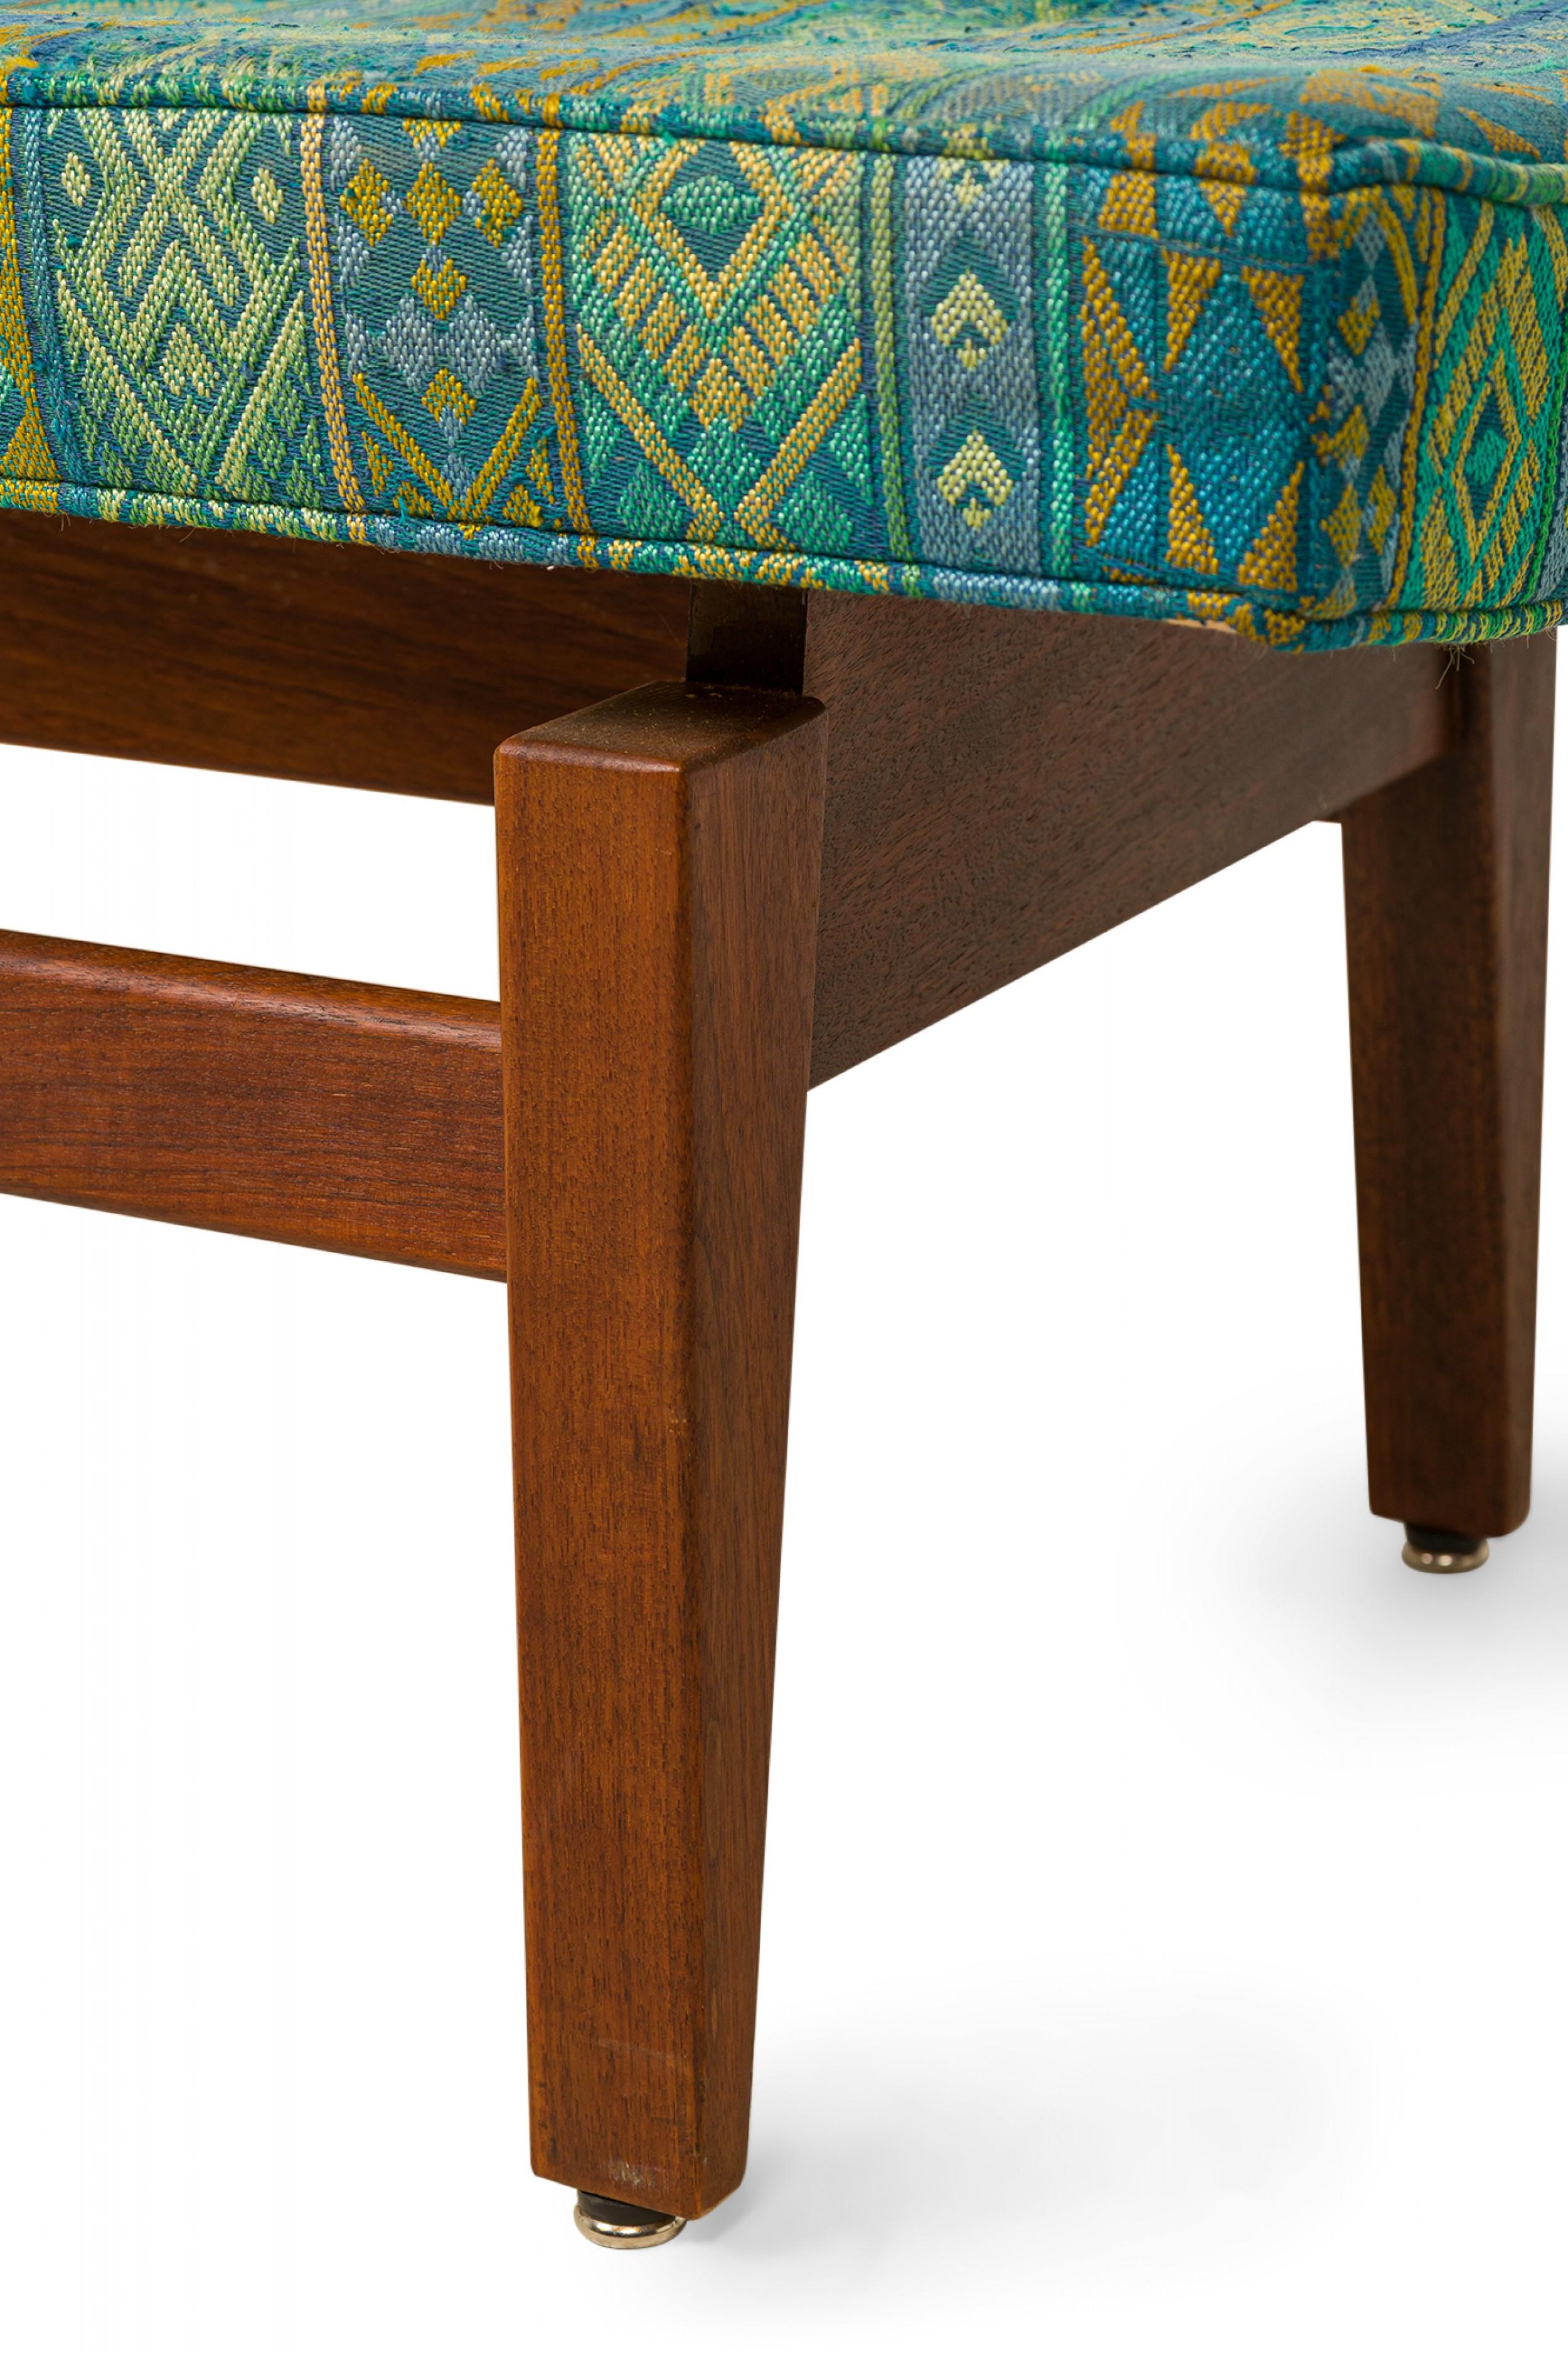 Jens Risom Danish Mid-Century Southwestern Pattern Upholstery and Wood Bench In Good Condition For Sale In New York, NY